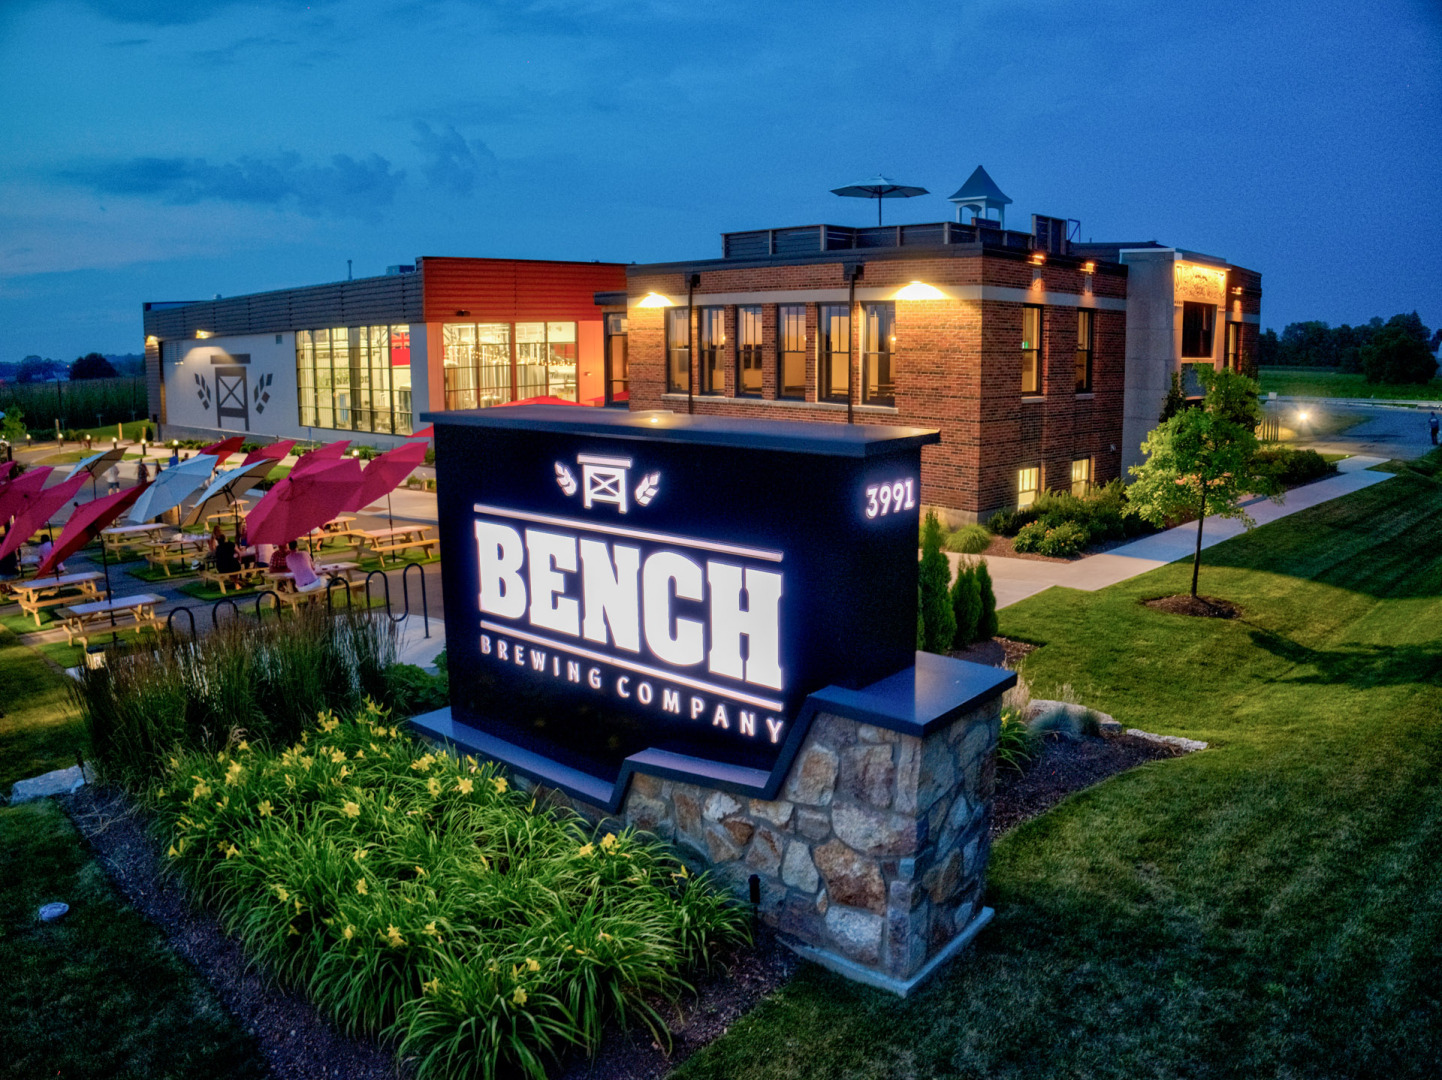 A modern restaurant building named "The Bench" illuminated at night against a blue twilight sky. The building has a sleek, contemporary design with large windows and an outdoor seating area surrounded by lush landscaping and flowers. The restaurant's name is prominently displayed on a stone monument sign at the entrance, inviting customers to dine at this upscale establishment.